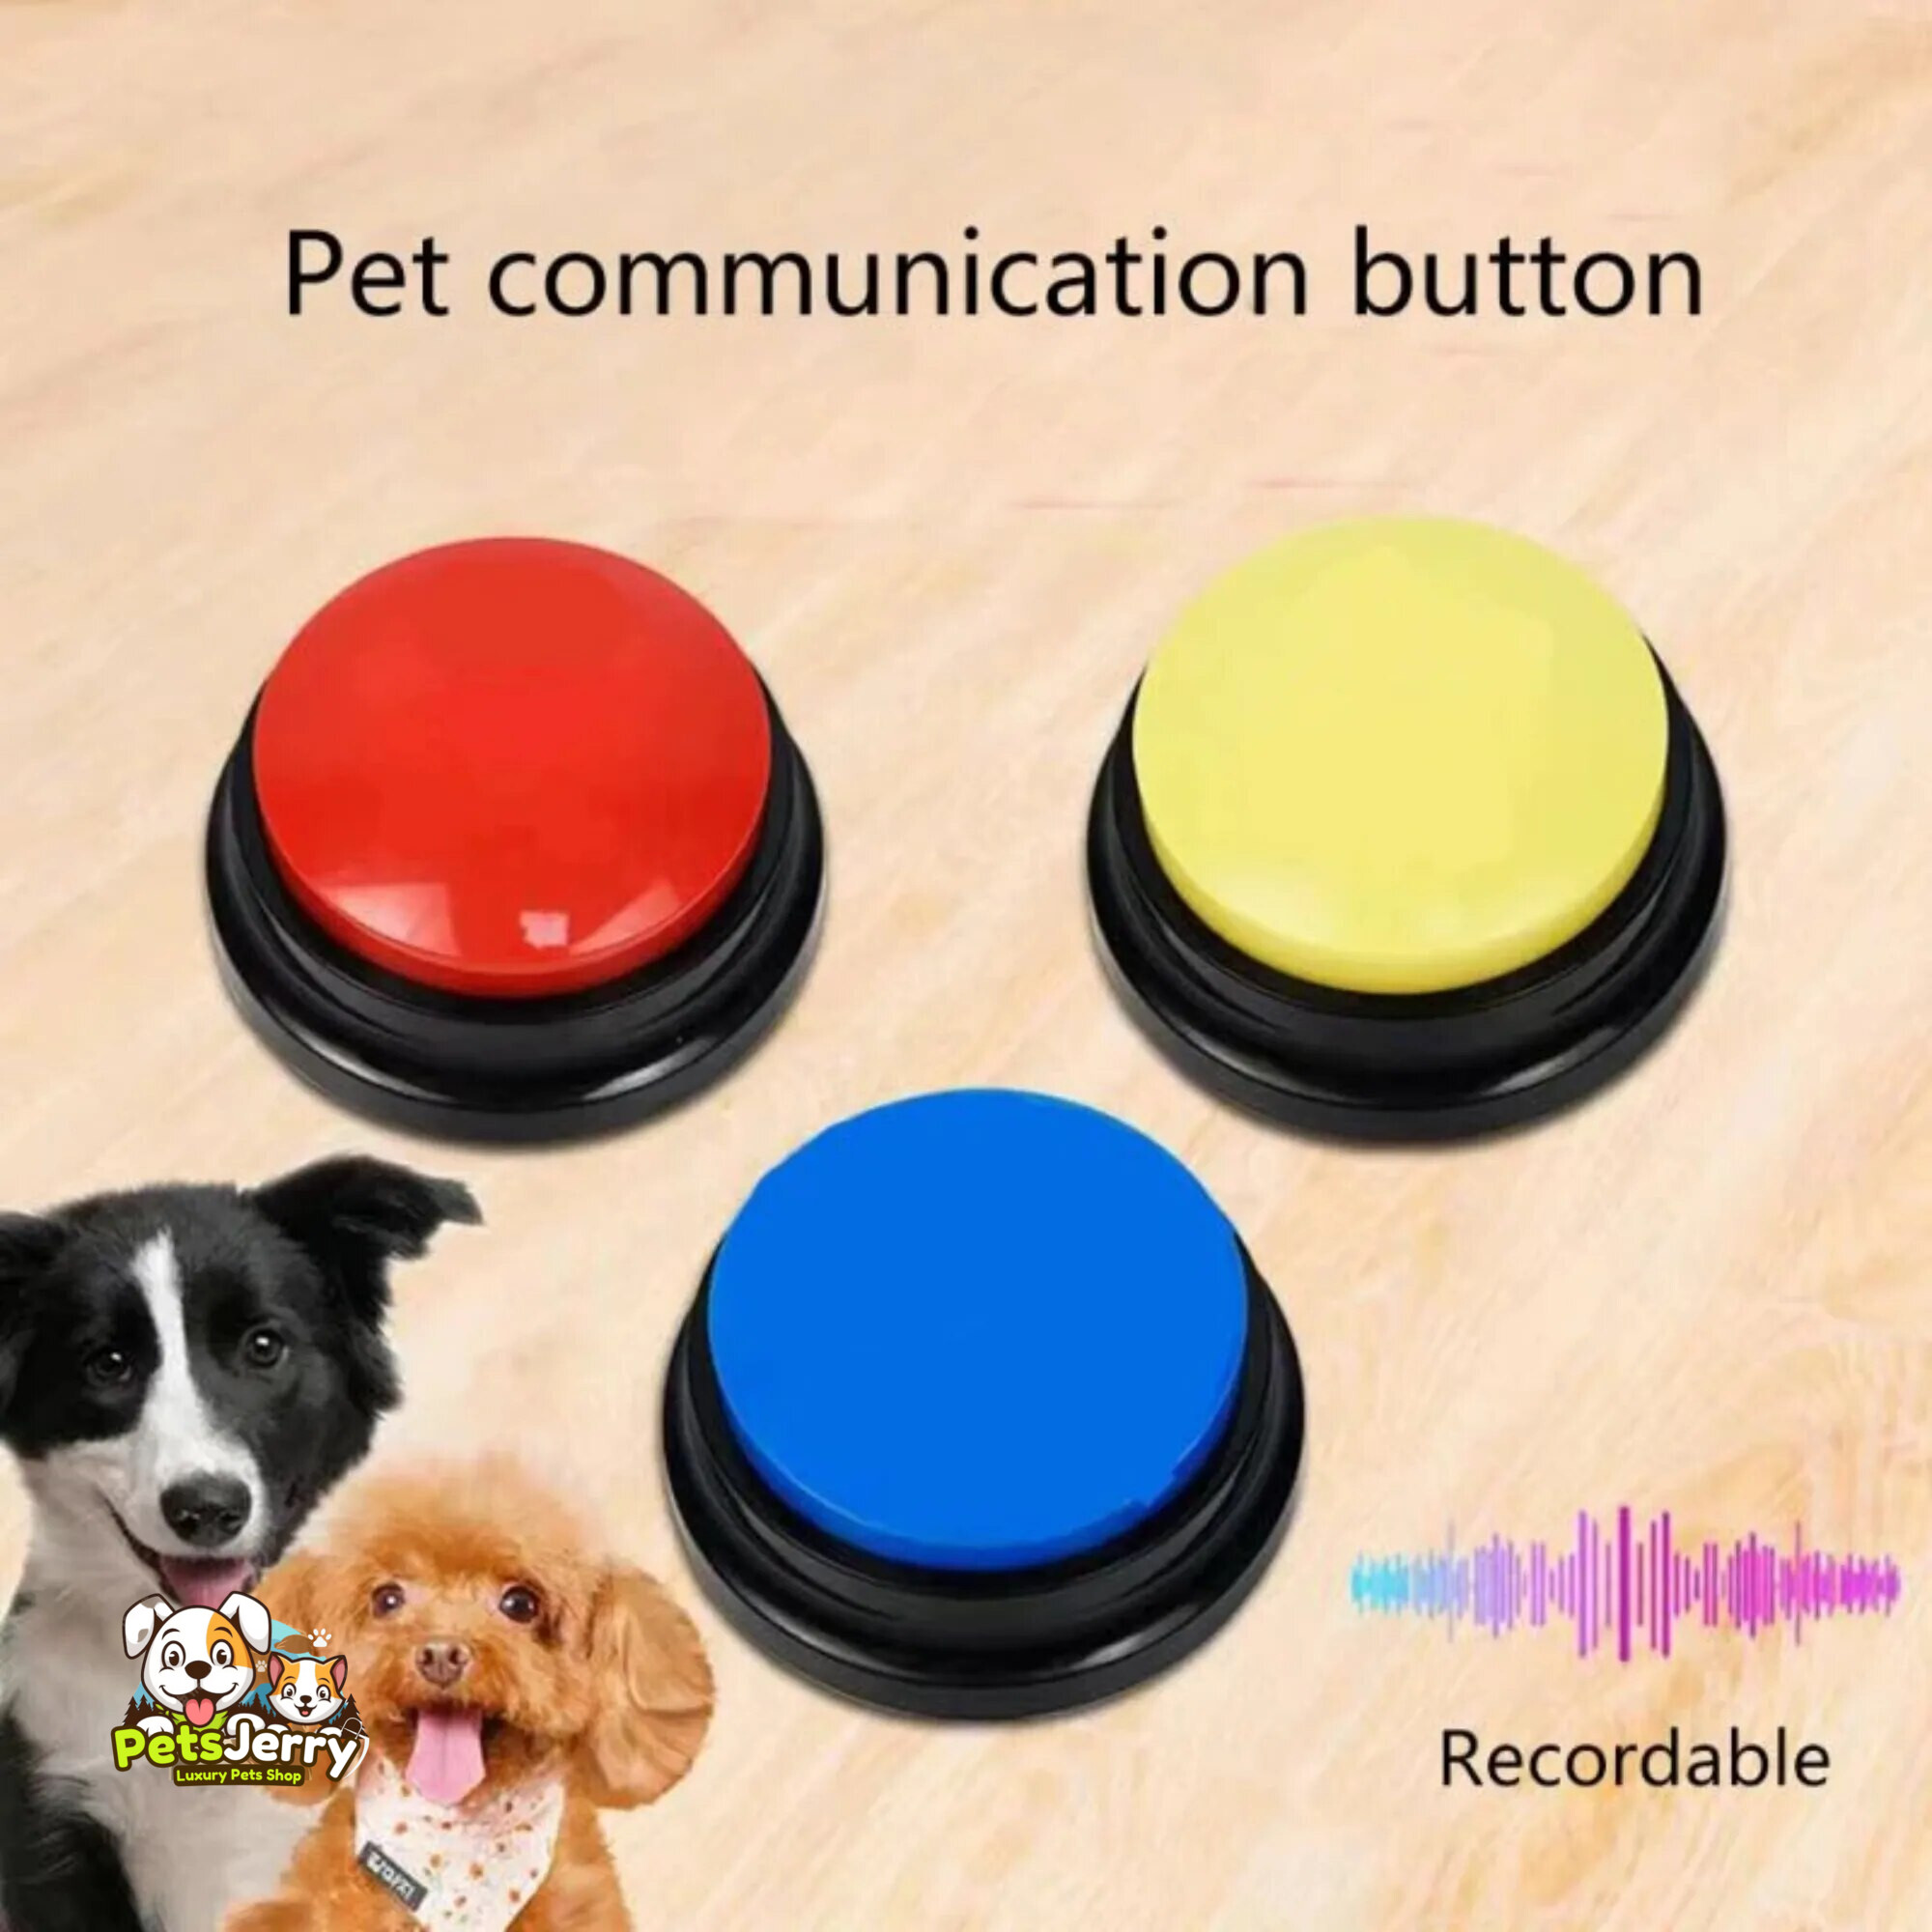 Talk to Your Dog with Communication Buttons: Breakthrough in Dog-Human Bonding